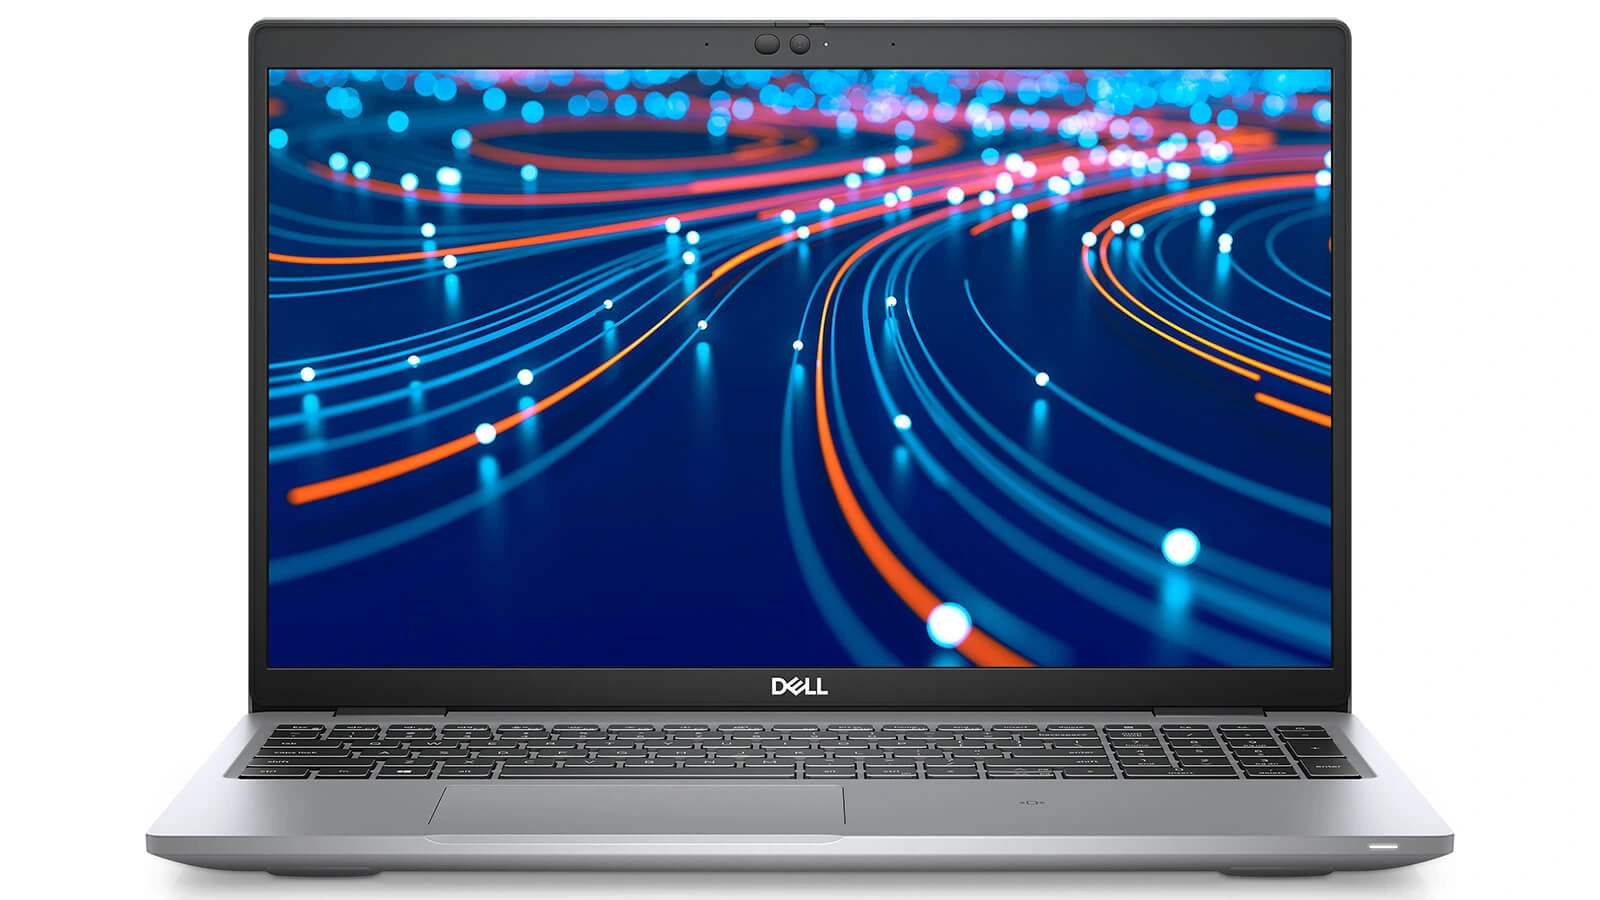 Dell Latitude 5520 Features 02